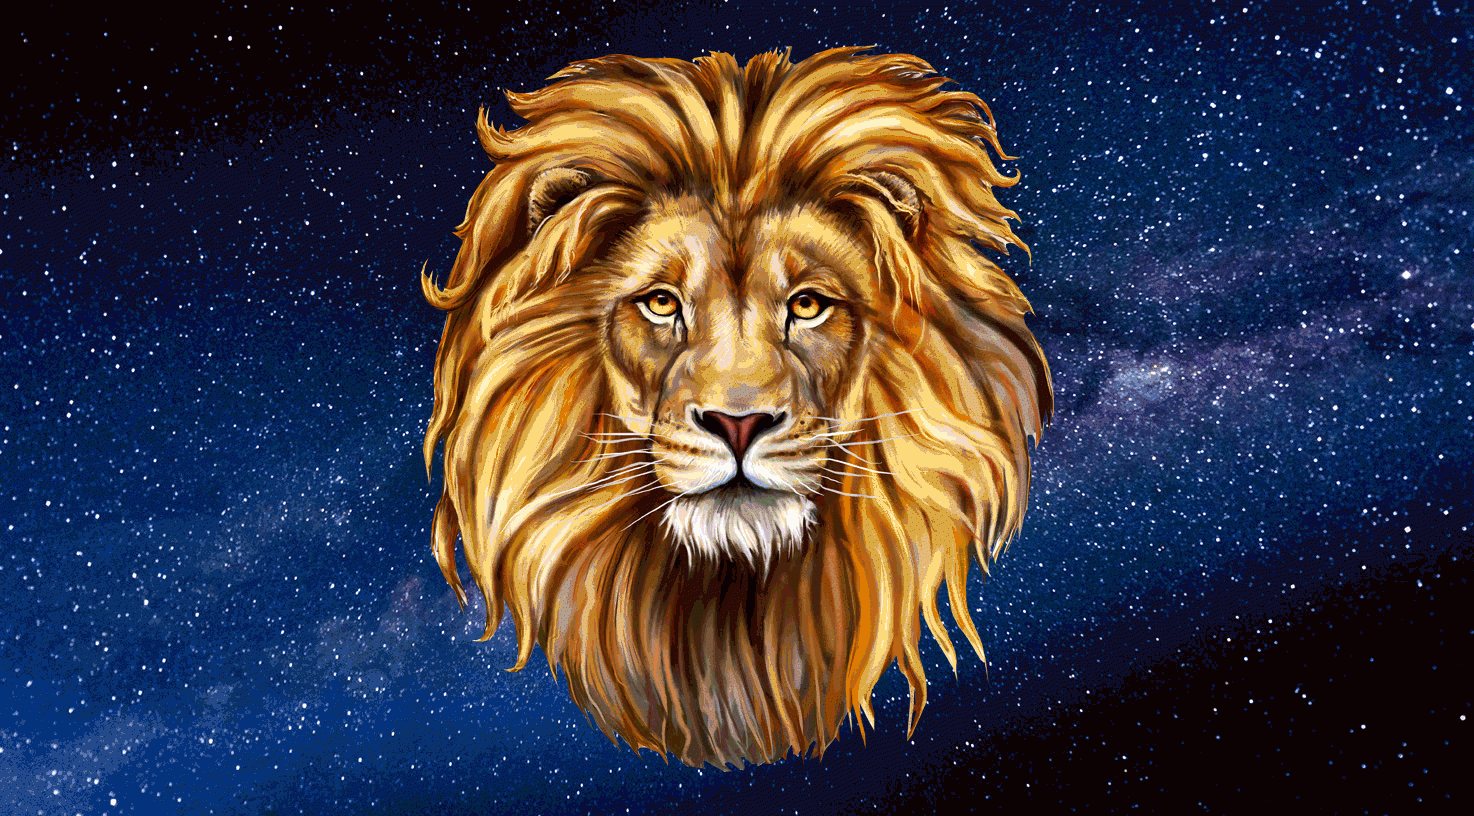 LEO Weekly Horoscope (March 1-7): Astrological Prediction for Love, Money & Finance, Career and Health